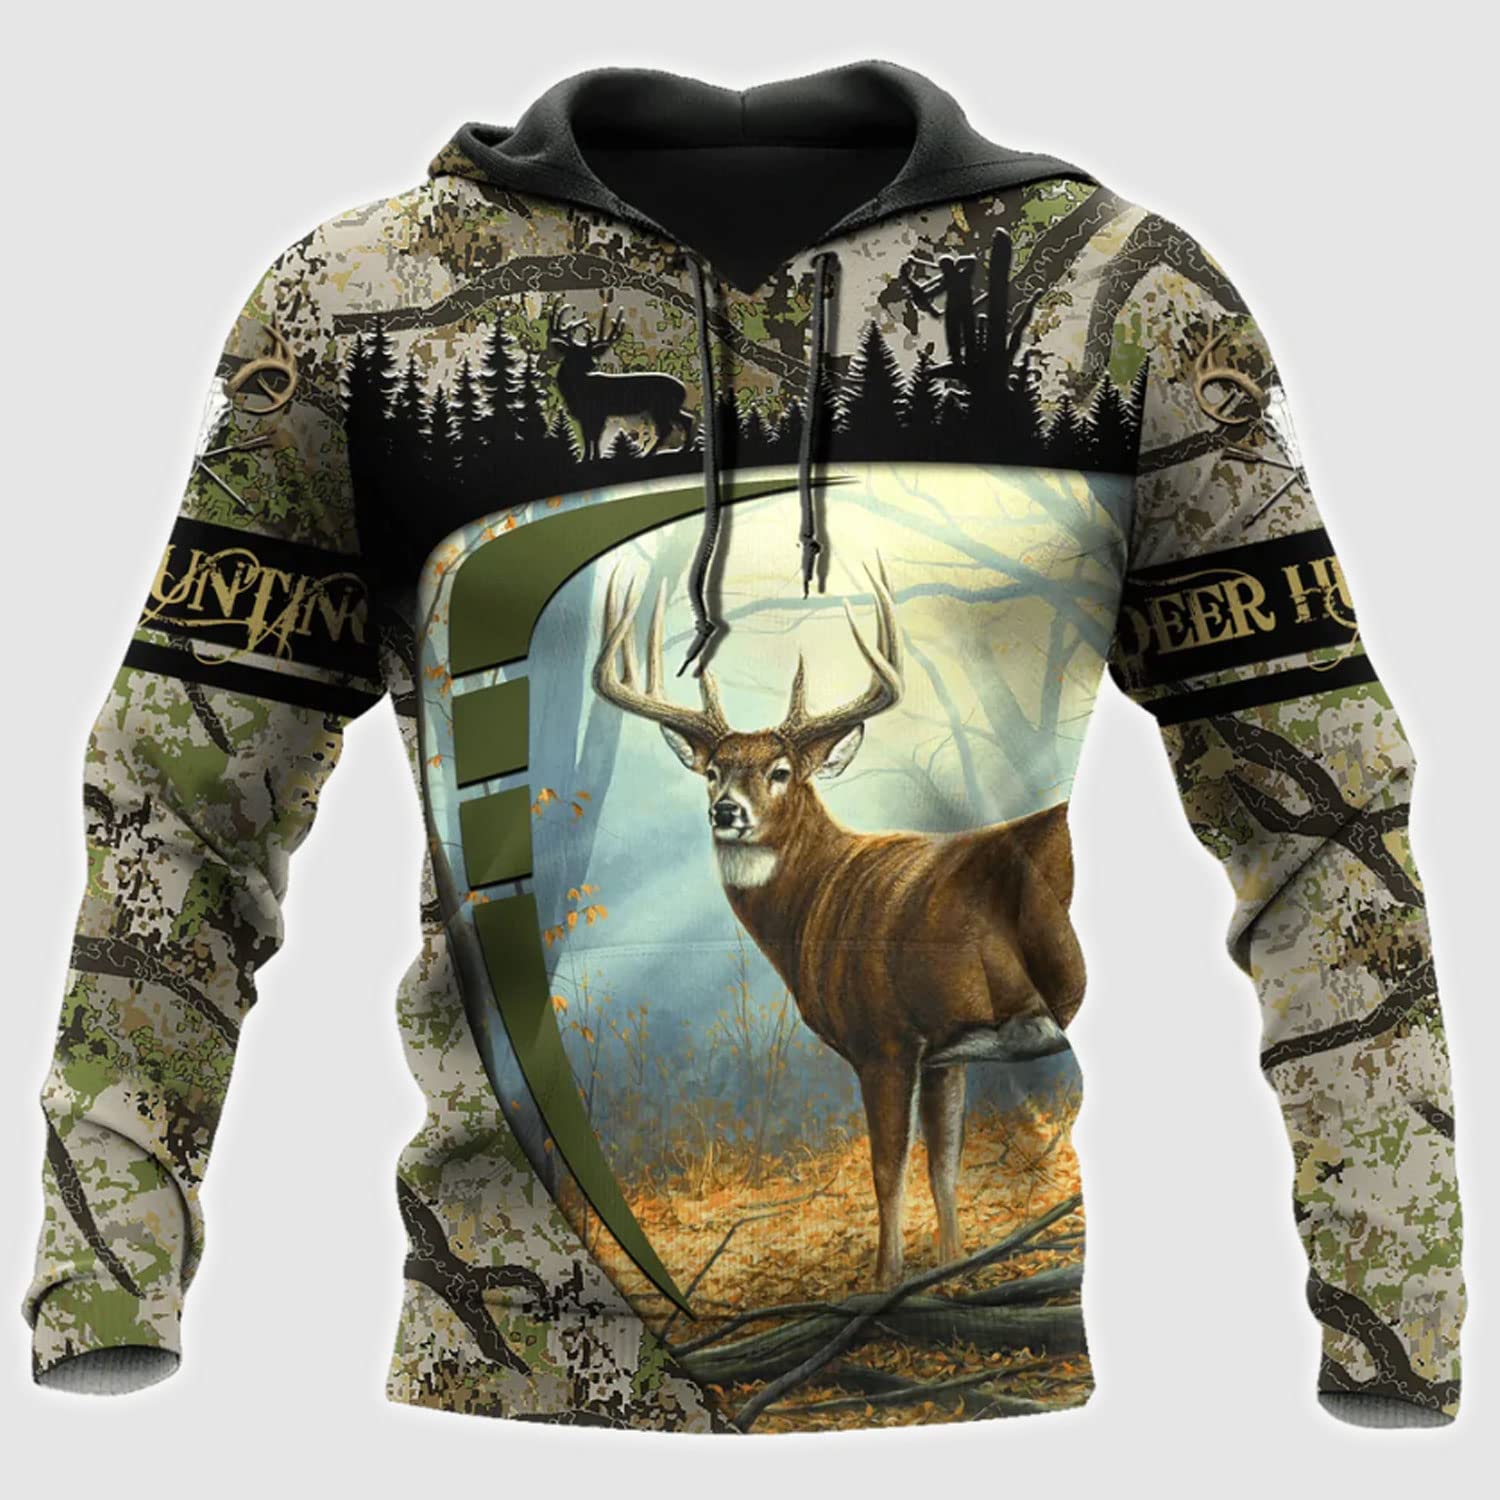 Get the Ultimate 3D Full Print Deer Hunting Experience with this Cool Animal Hunting Shirt – Perfect for Deer Hunter Lovers and as a Gift for the Whole Family! – JOT1500